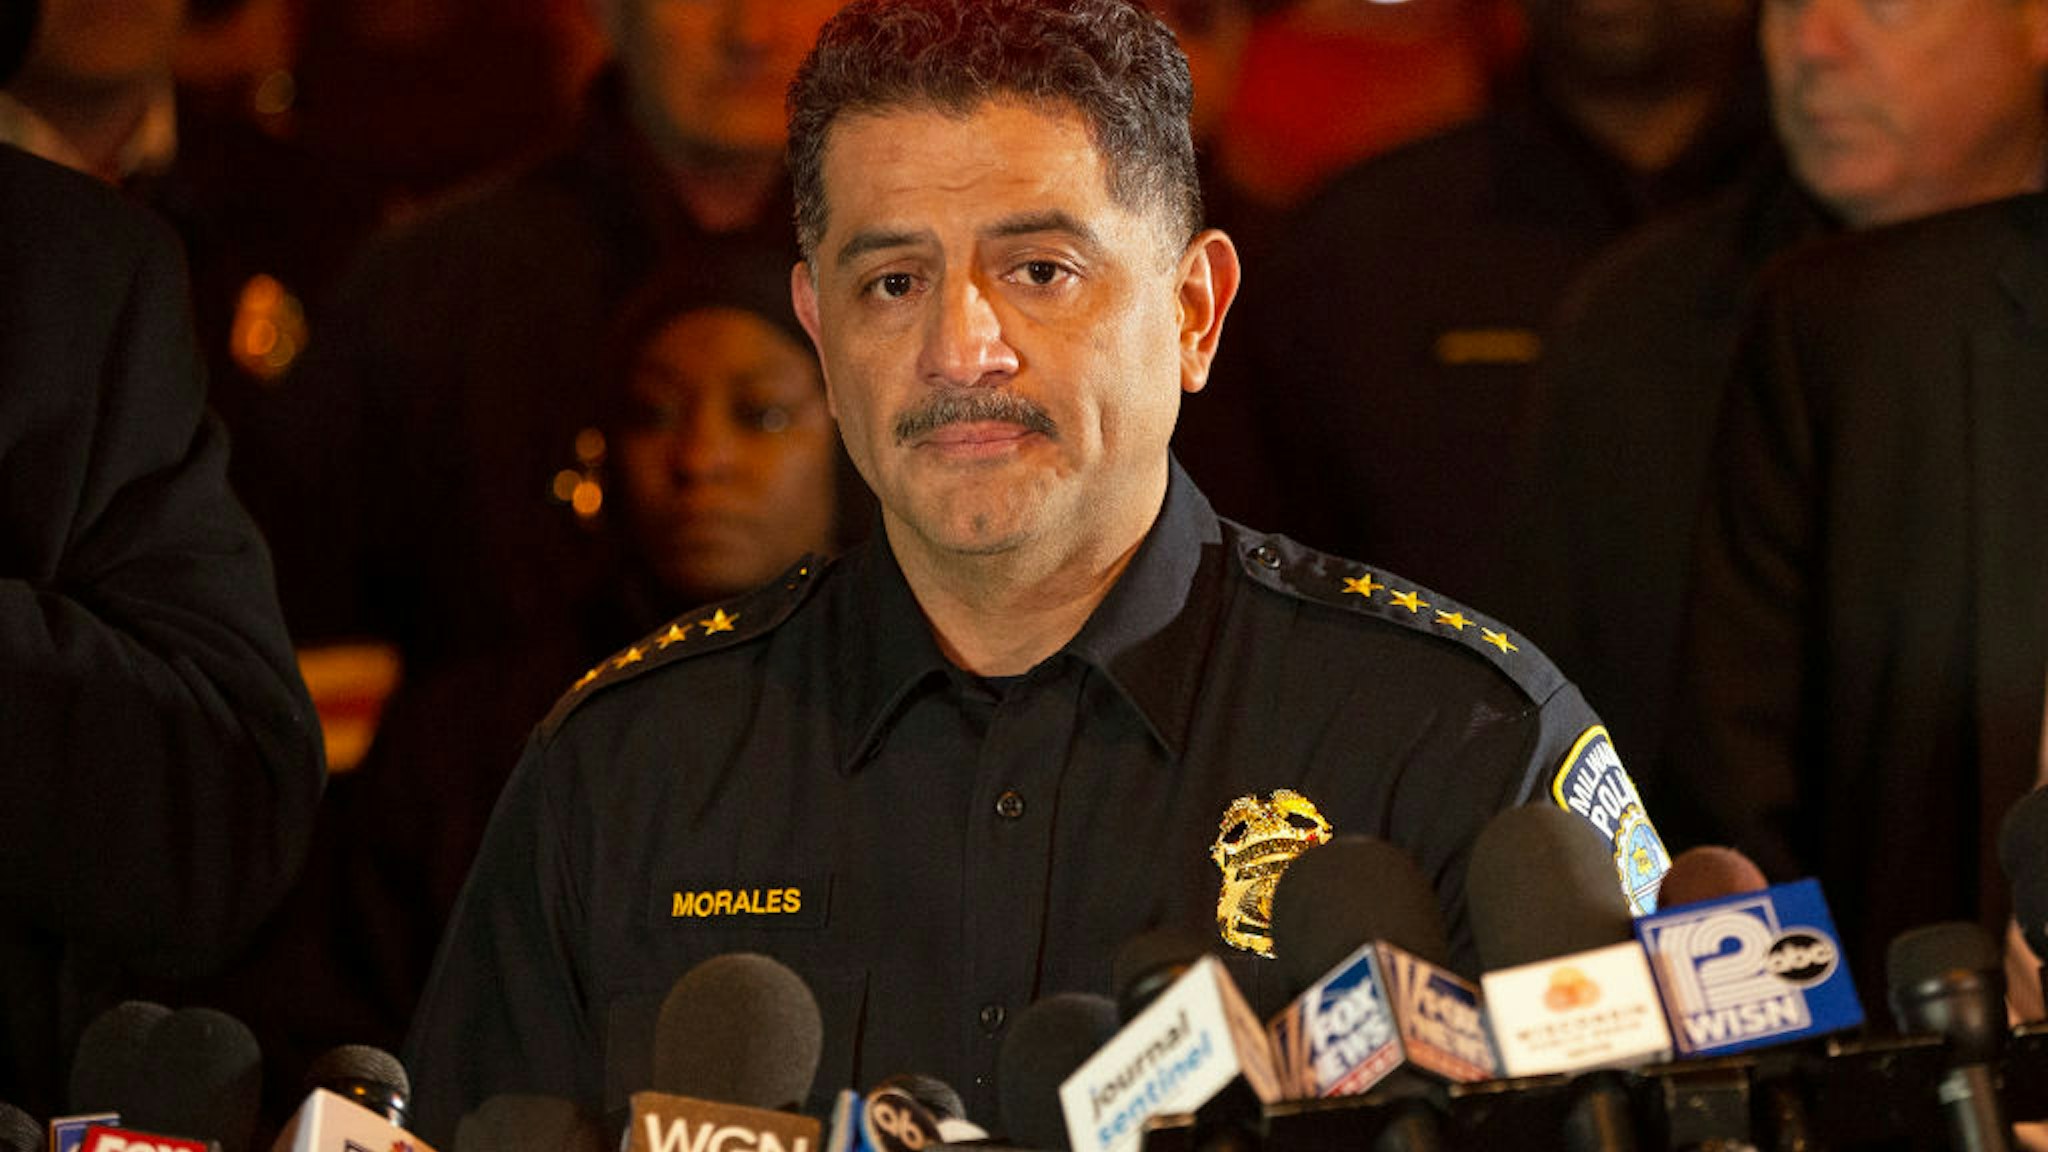 Milwaukee Police Chief Alfonso Morales speaks to the media following a shooting at the Molson Coors Brewing Co. campus on February 26, 2020 in Milwaukee, Wisconsin.